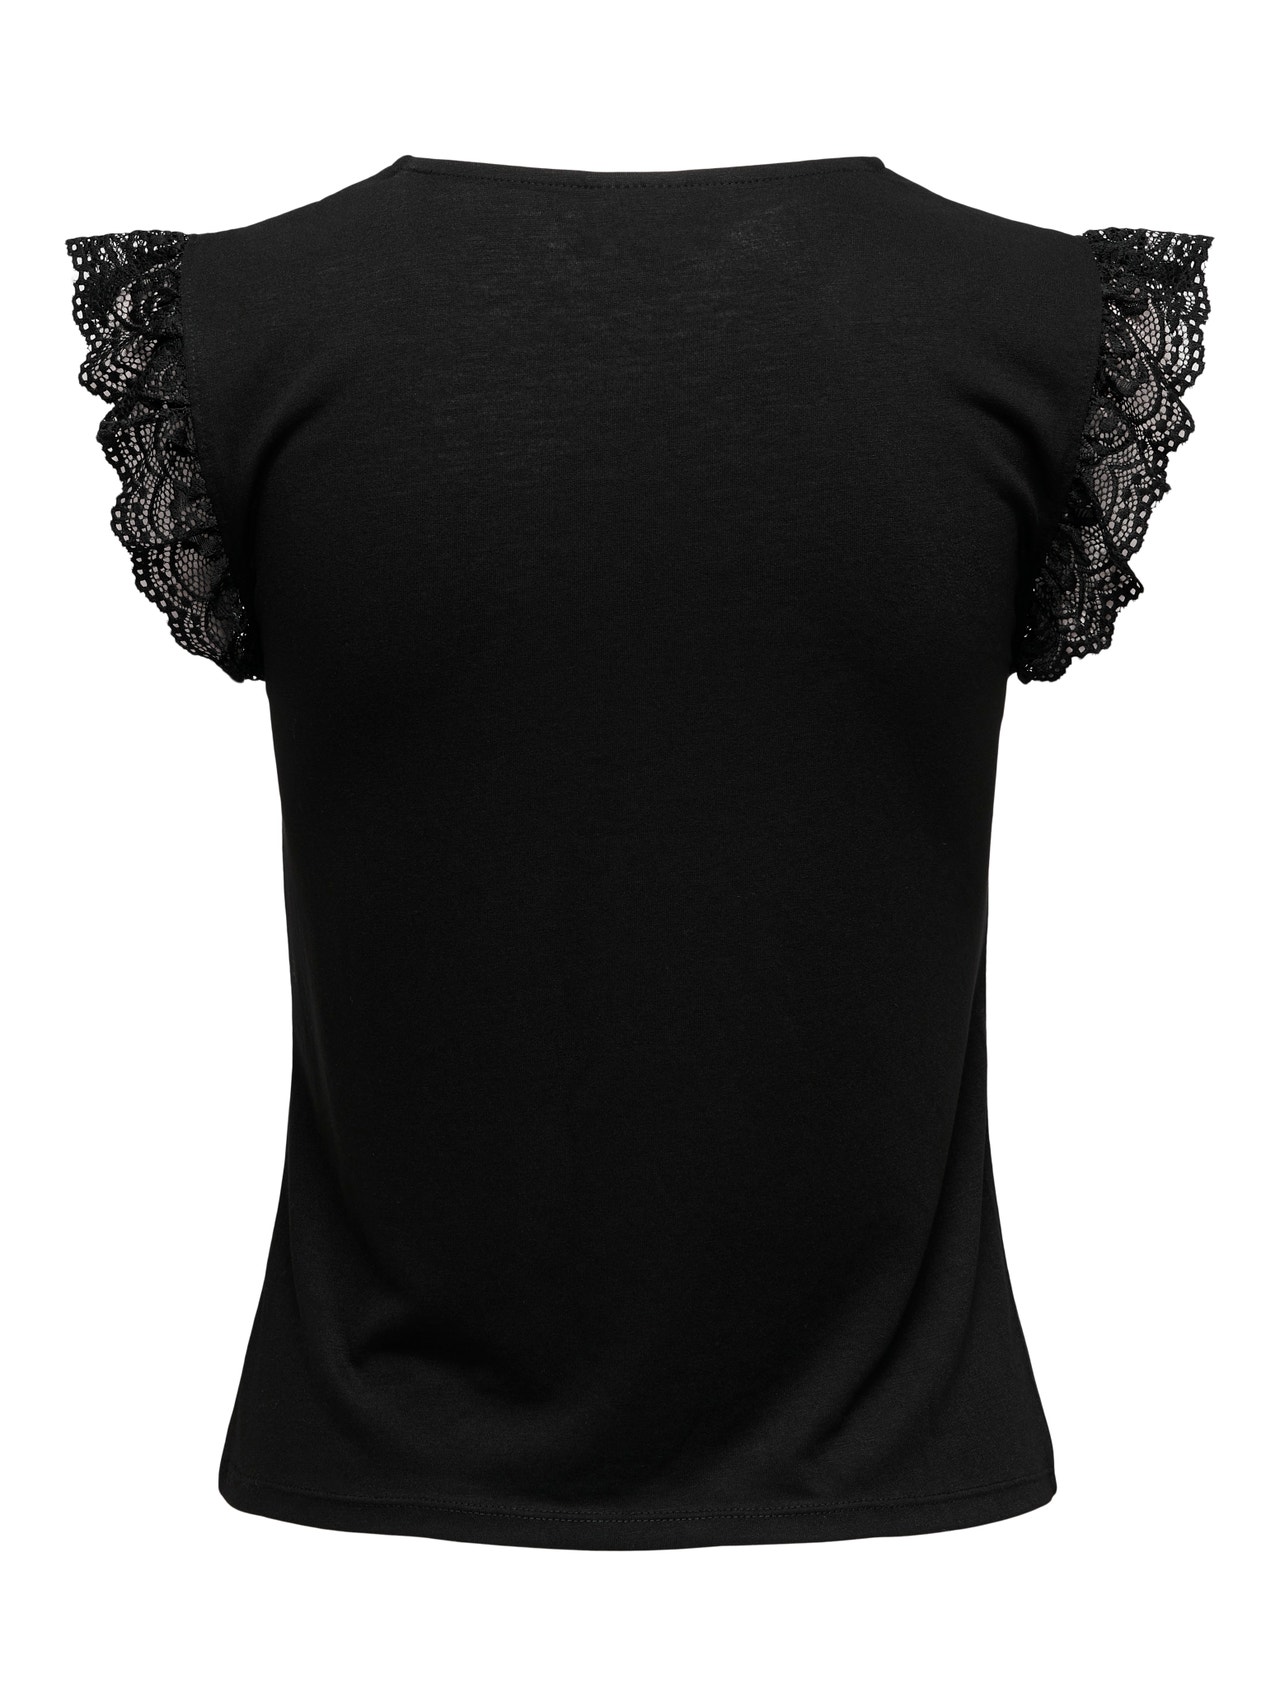 ONLY Top with lace and frills -Black - 15297387